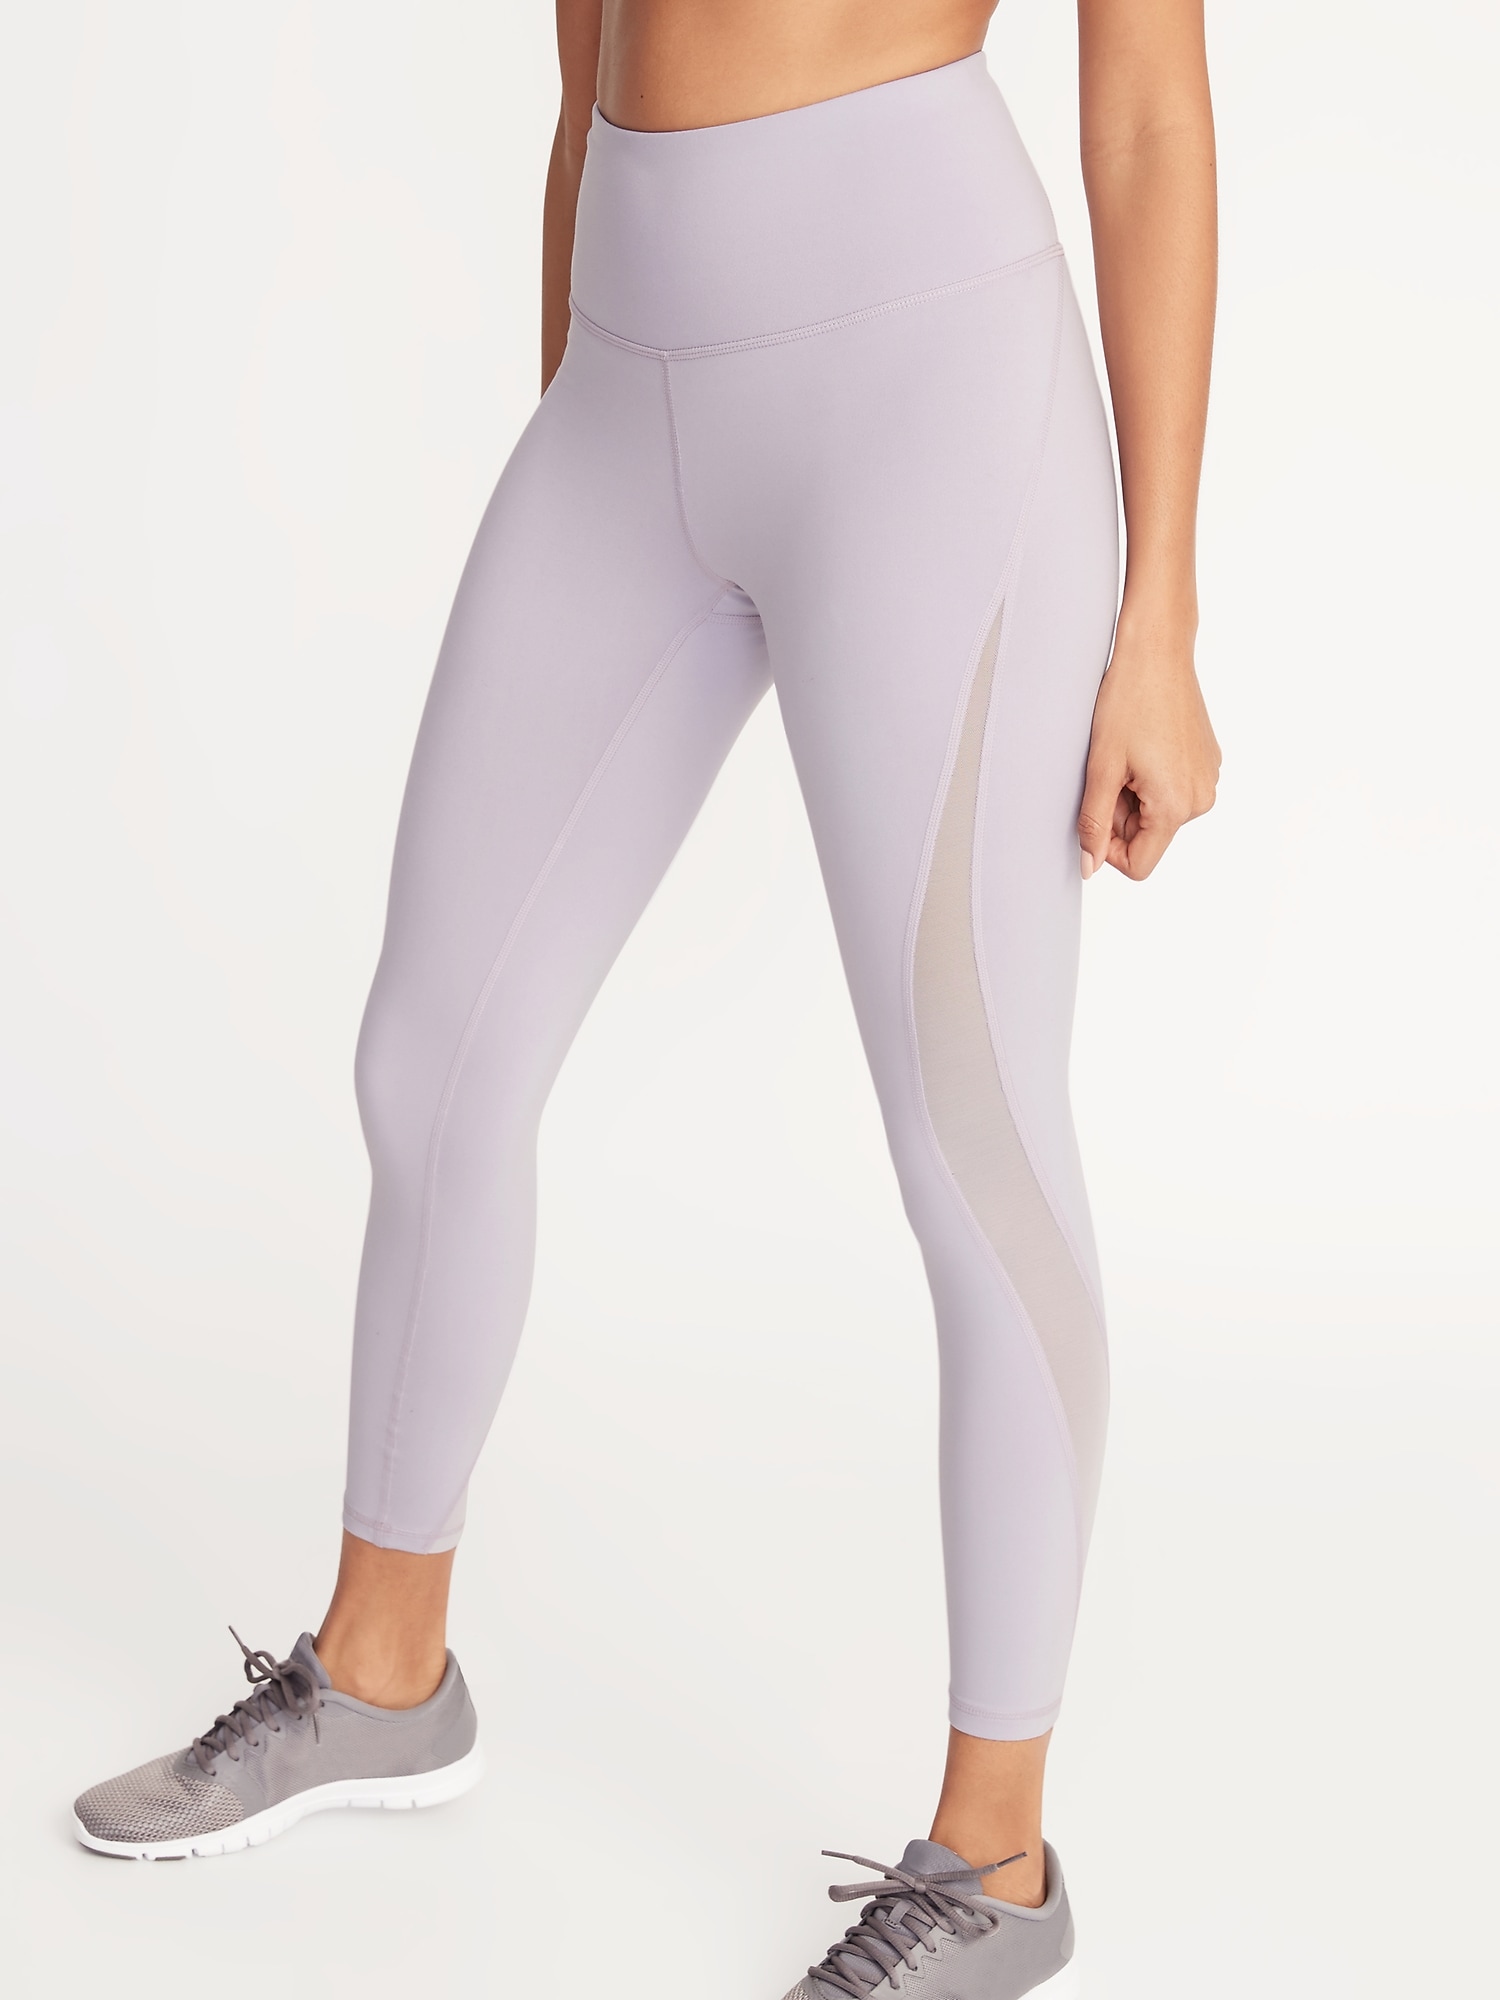 High-Waisted Elevate 7/8-Length Compression Leggings for Women